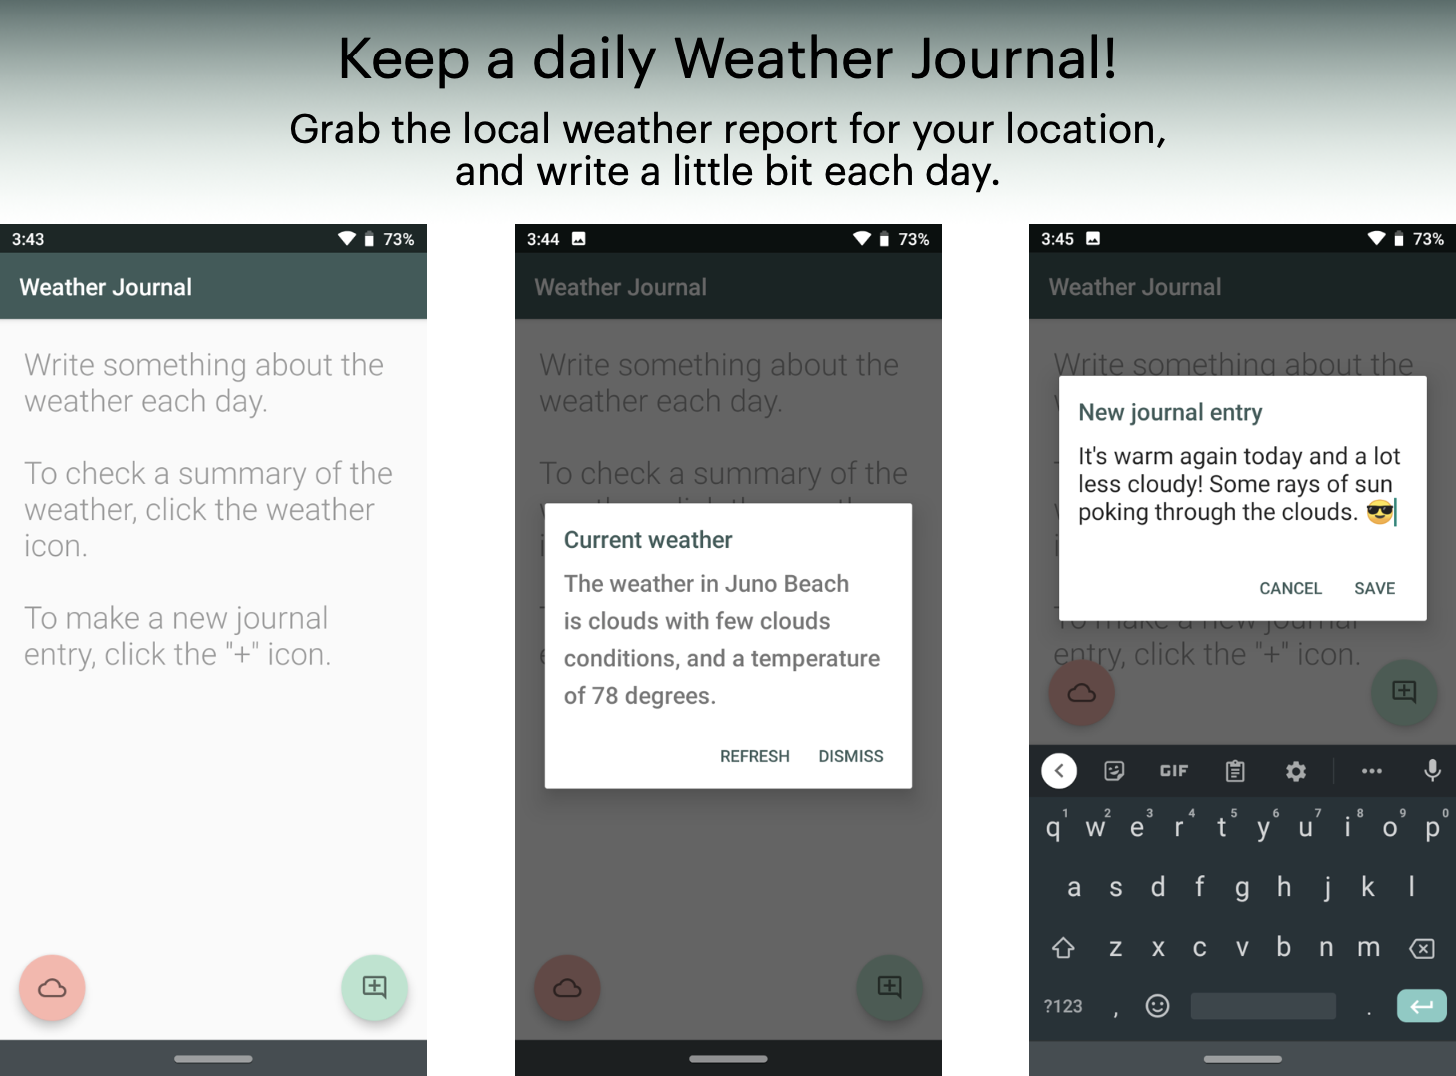 Keep a daily Weather Journal! Grab the local weather report for your location and write a little bit each day.